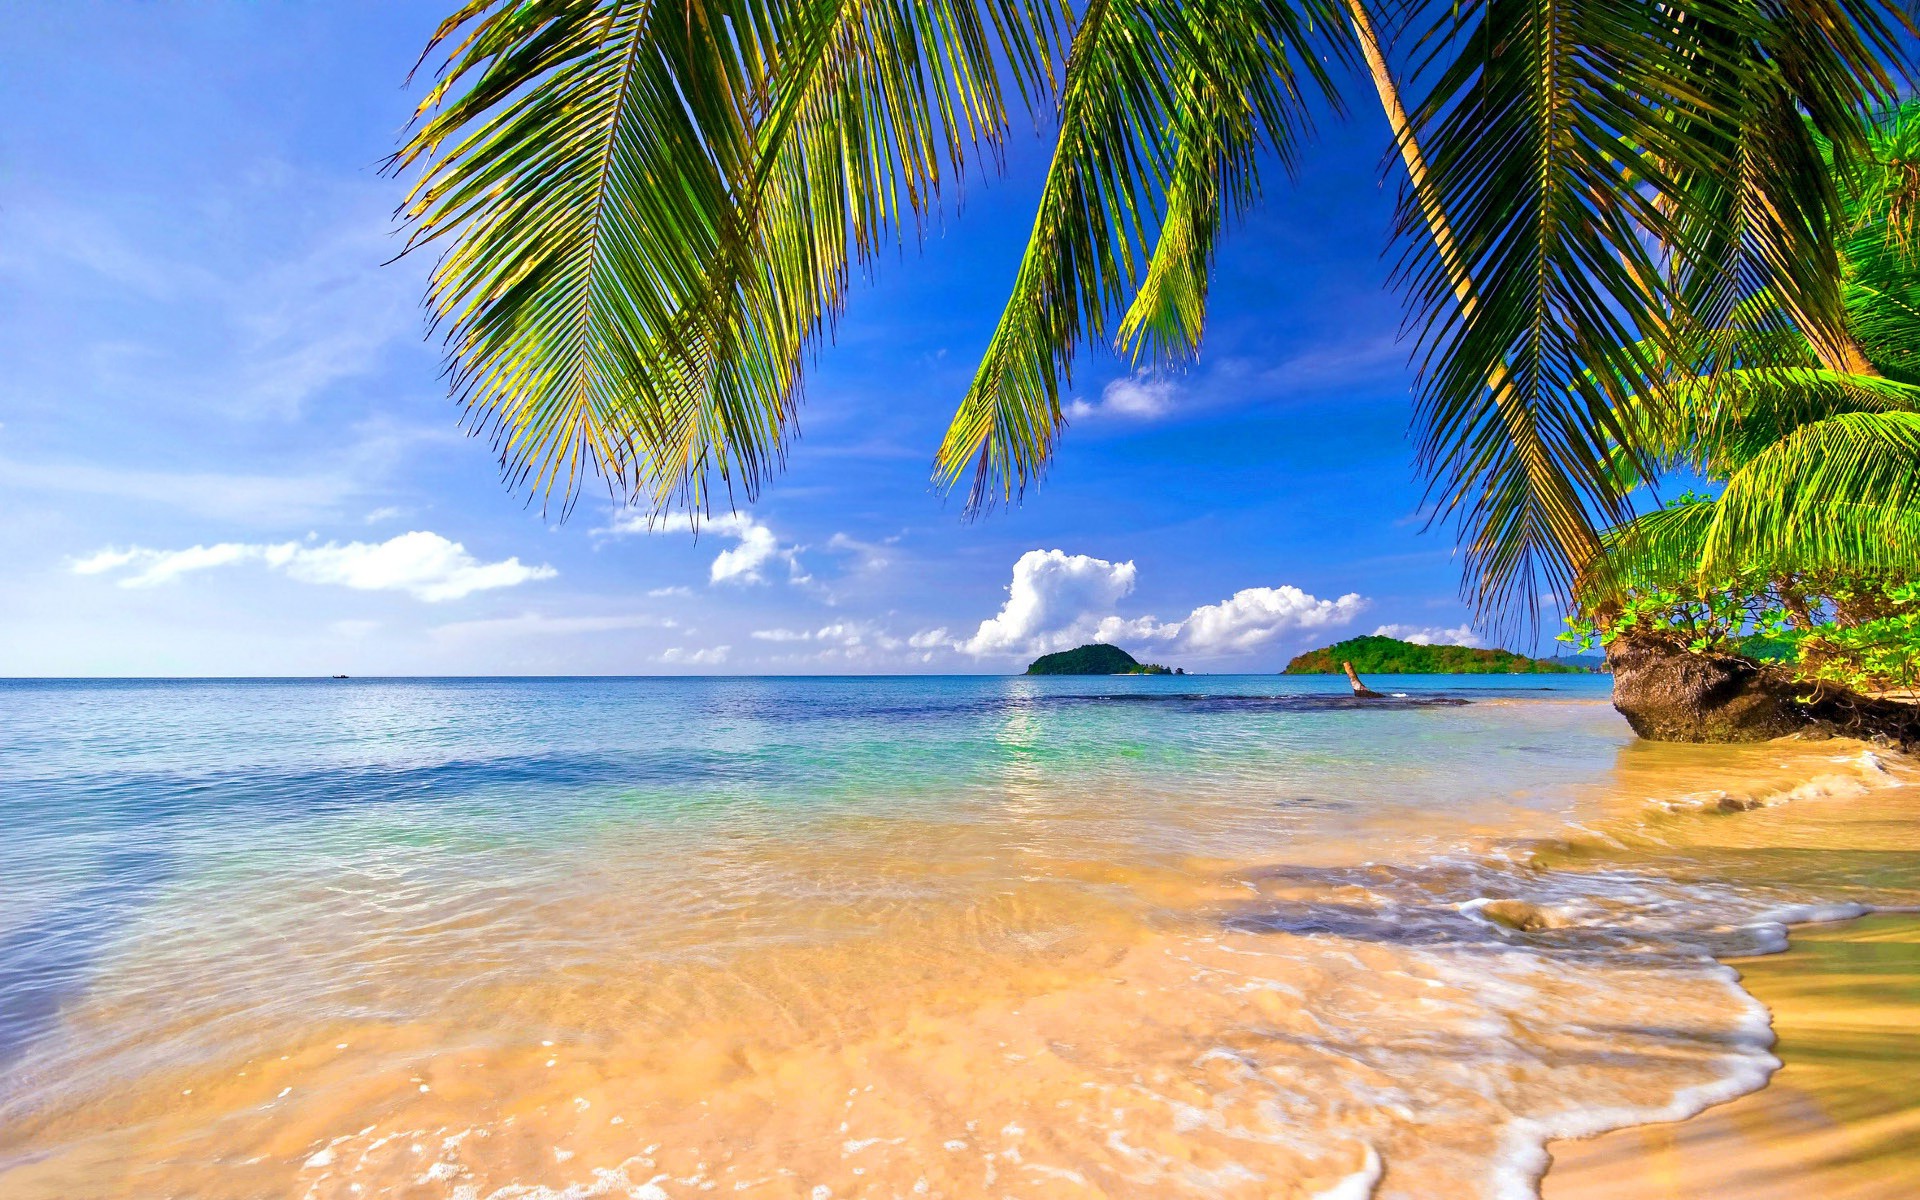 Sea, palm trees wallpaper | nature and landscape ...